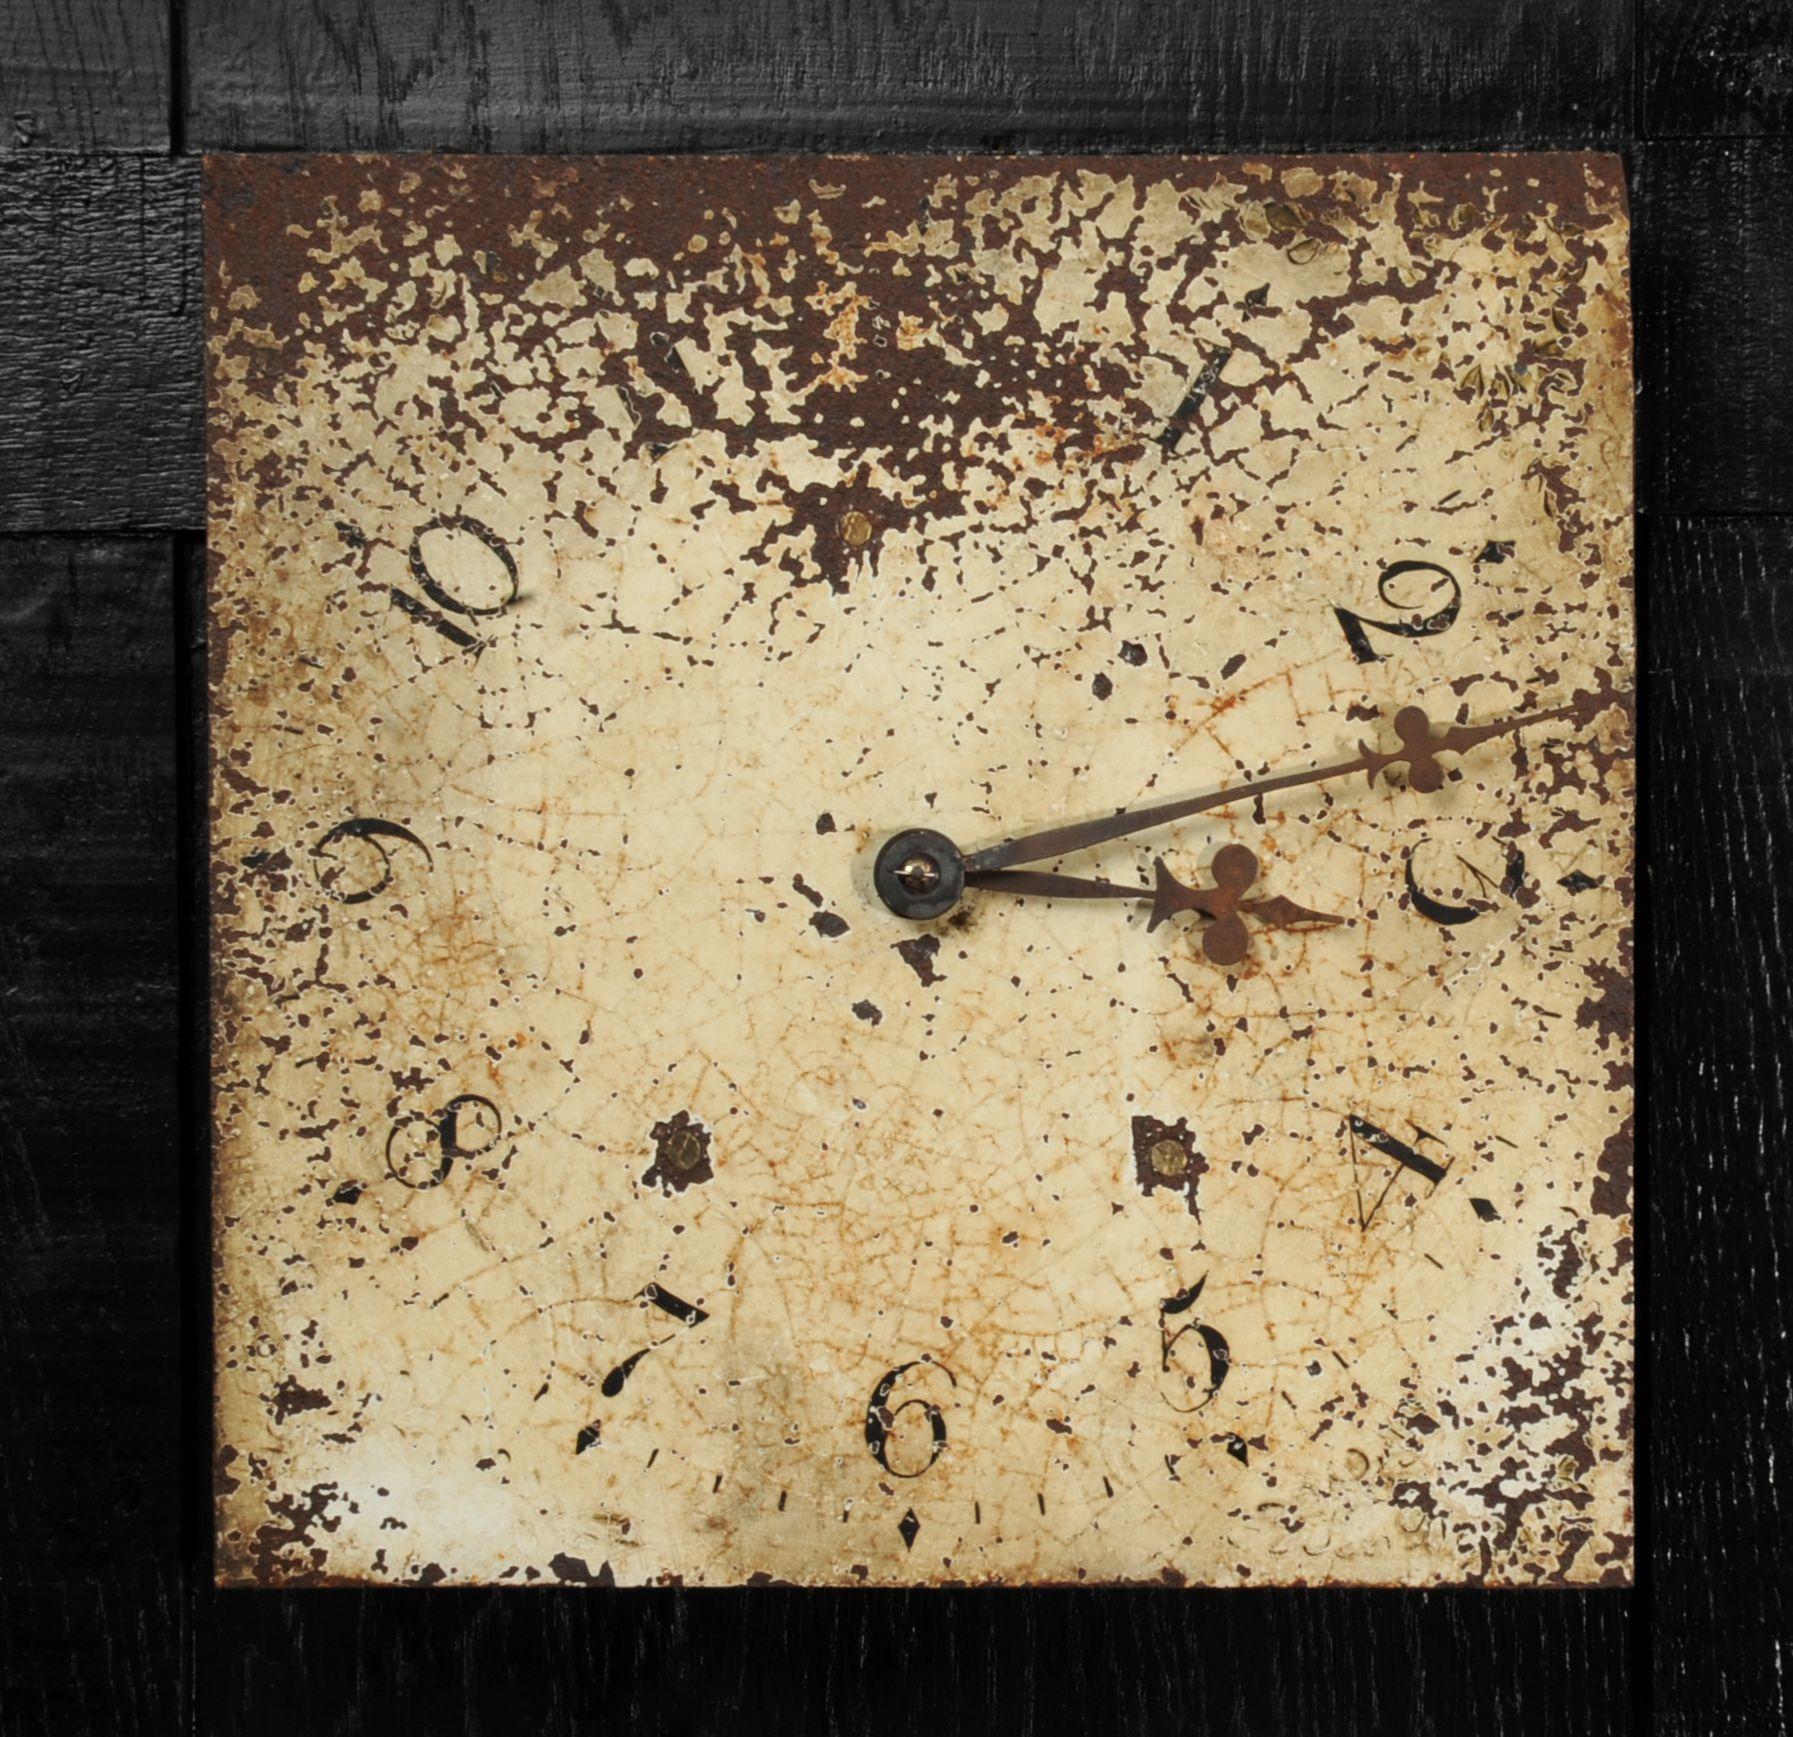 A lovely antique English iron clock dial dating from circa 1830. Found by our buyer in a derelict estate workshop. It shows the signs of long neglect, beautifully patinated with an ancient craquelure, paint loss and rust. The fine, once blued steel